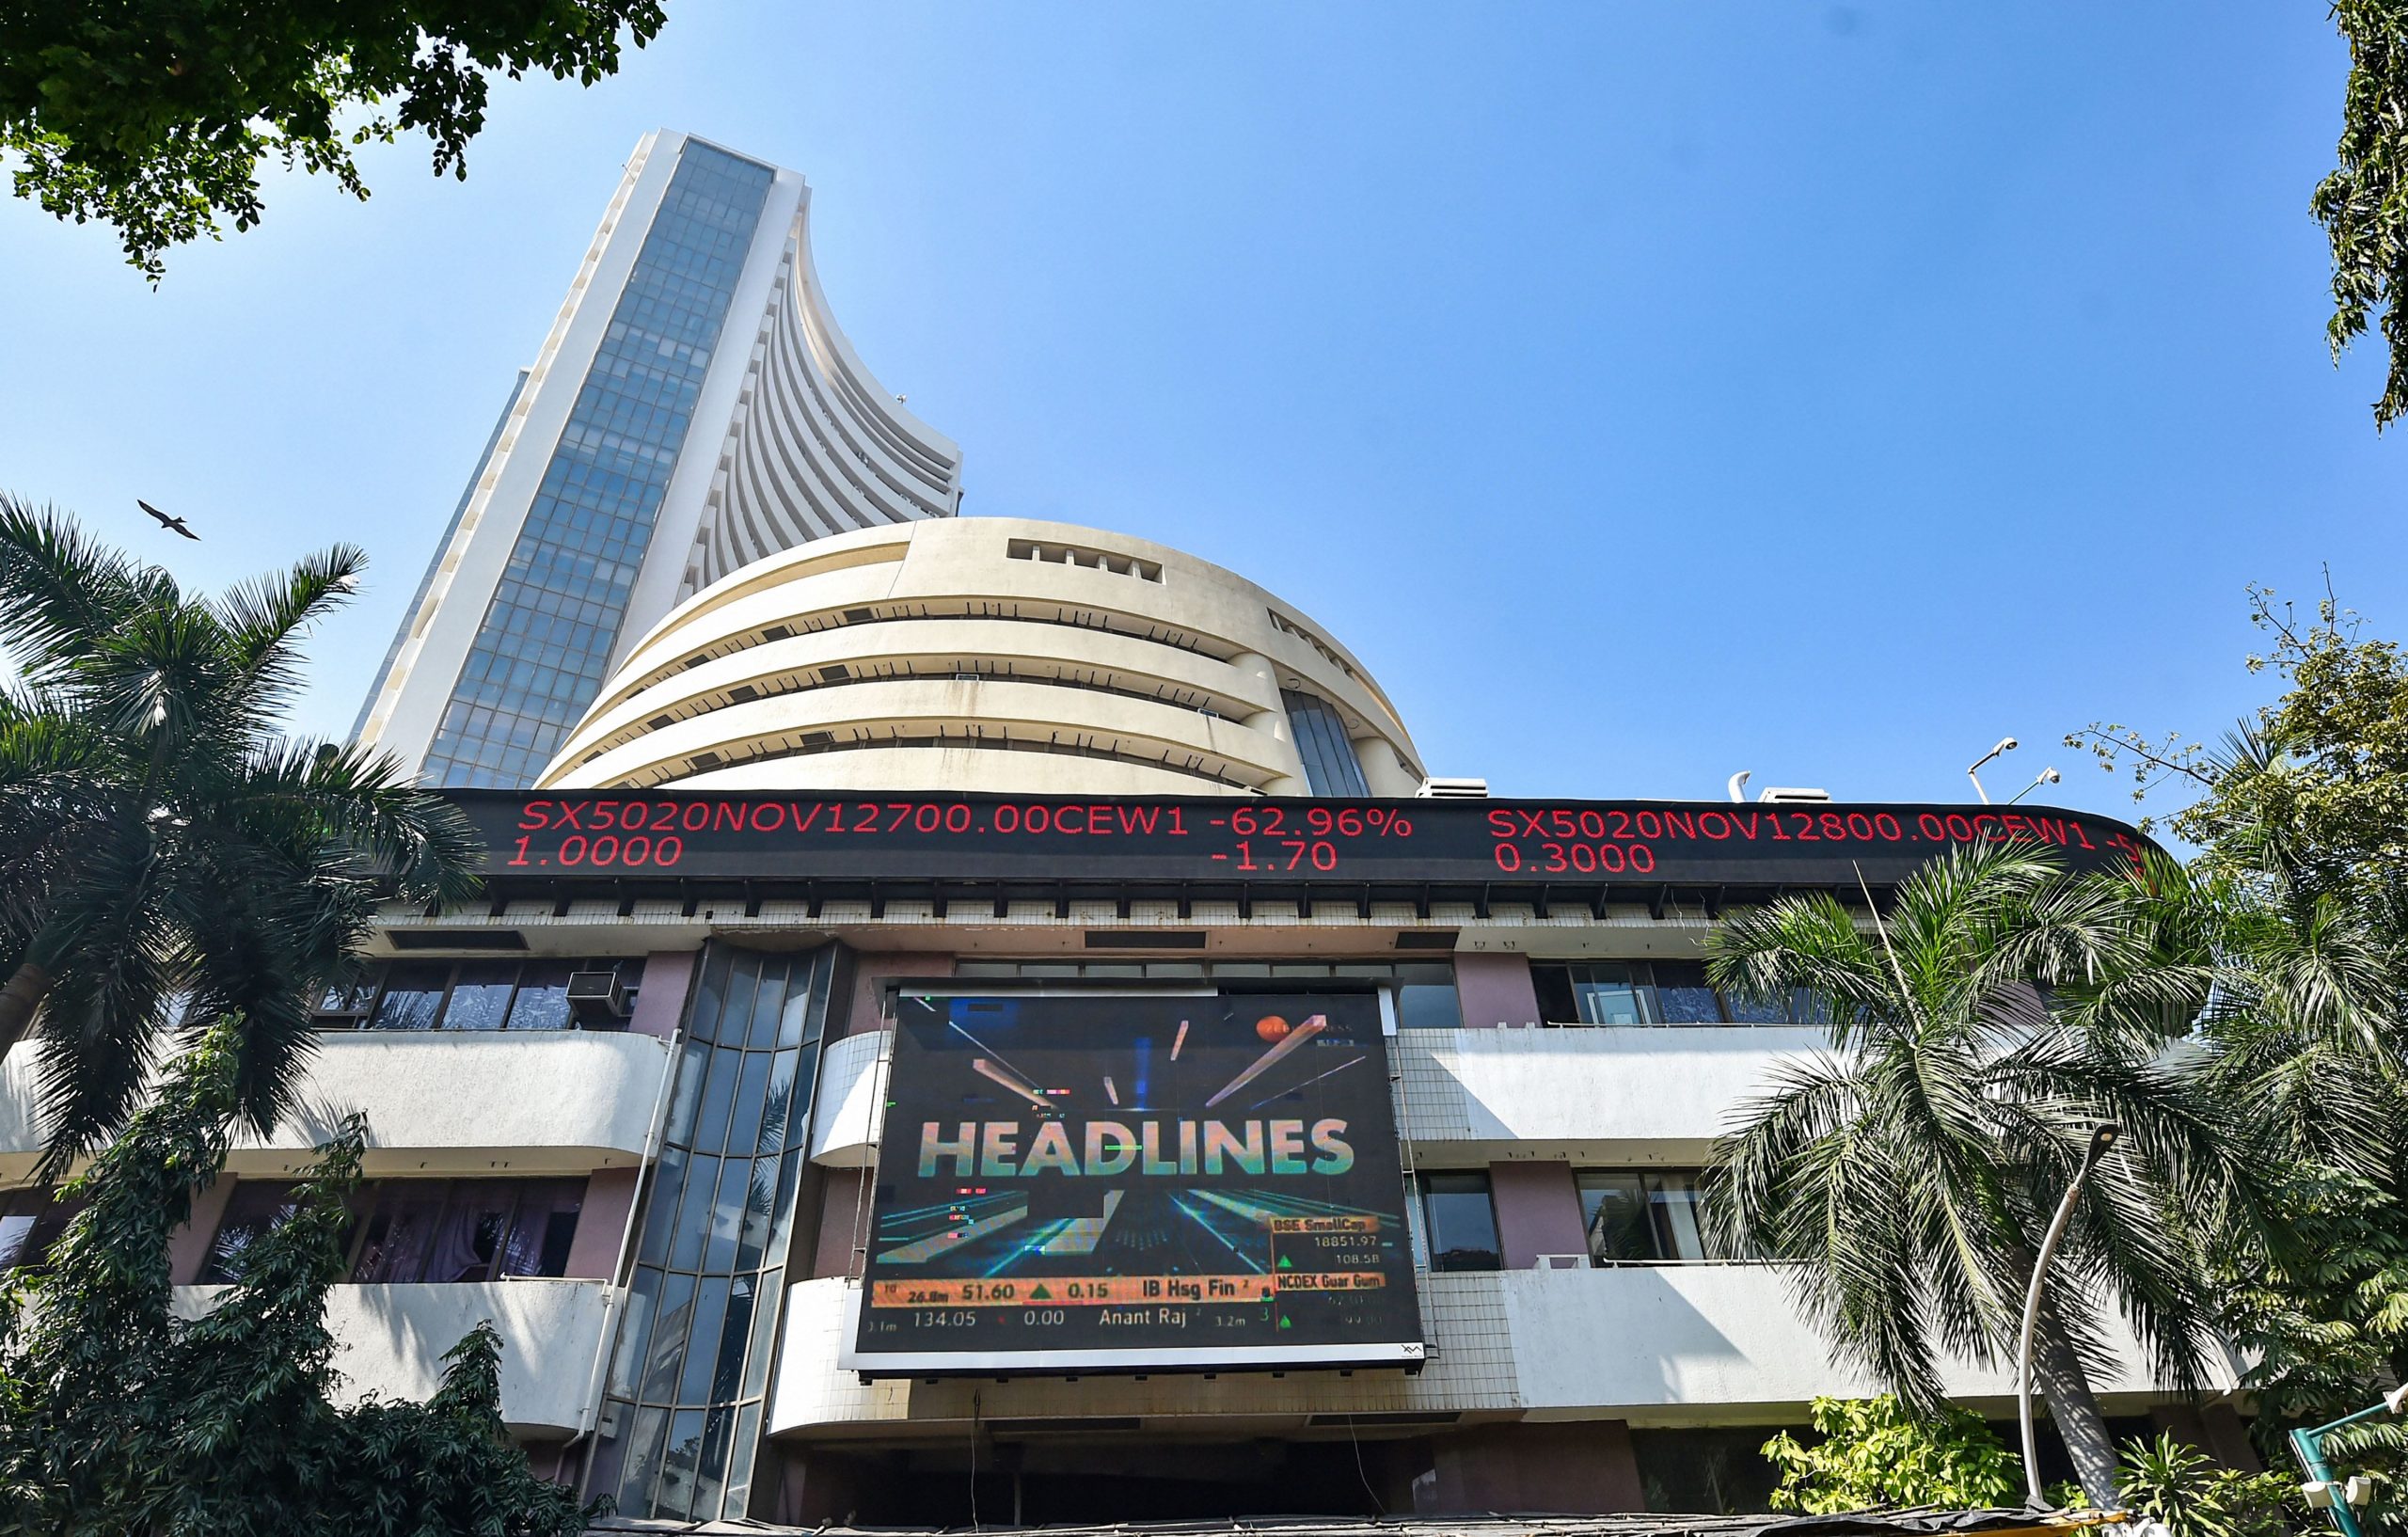 Trending Stocks: Titan, Mindtree, Tata, RIL, GTPL, HAL and others in news today